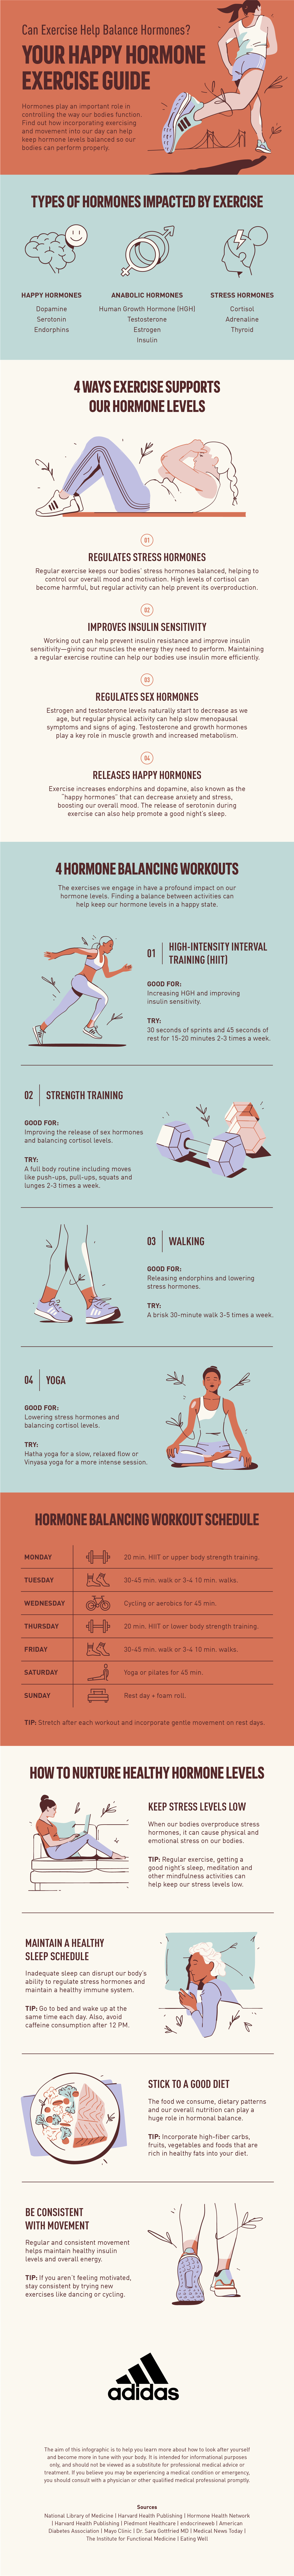 can-exercise-help-balance-hormones-infographic.png